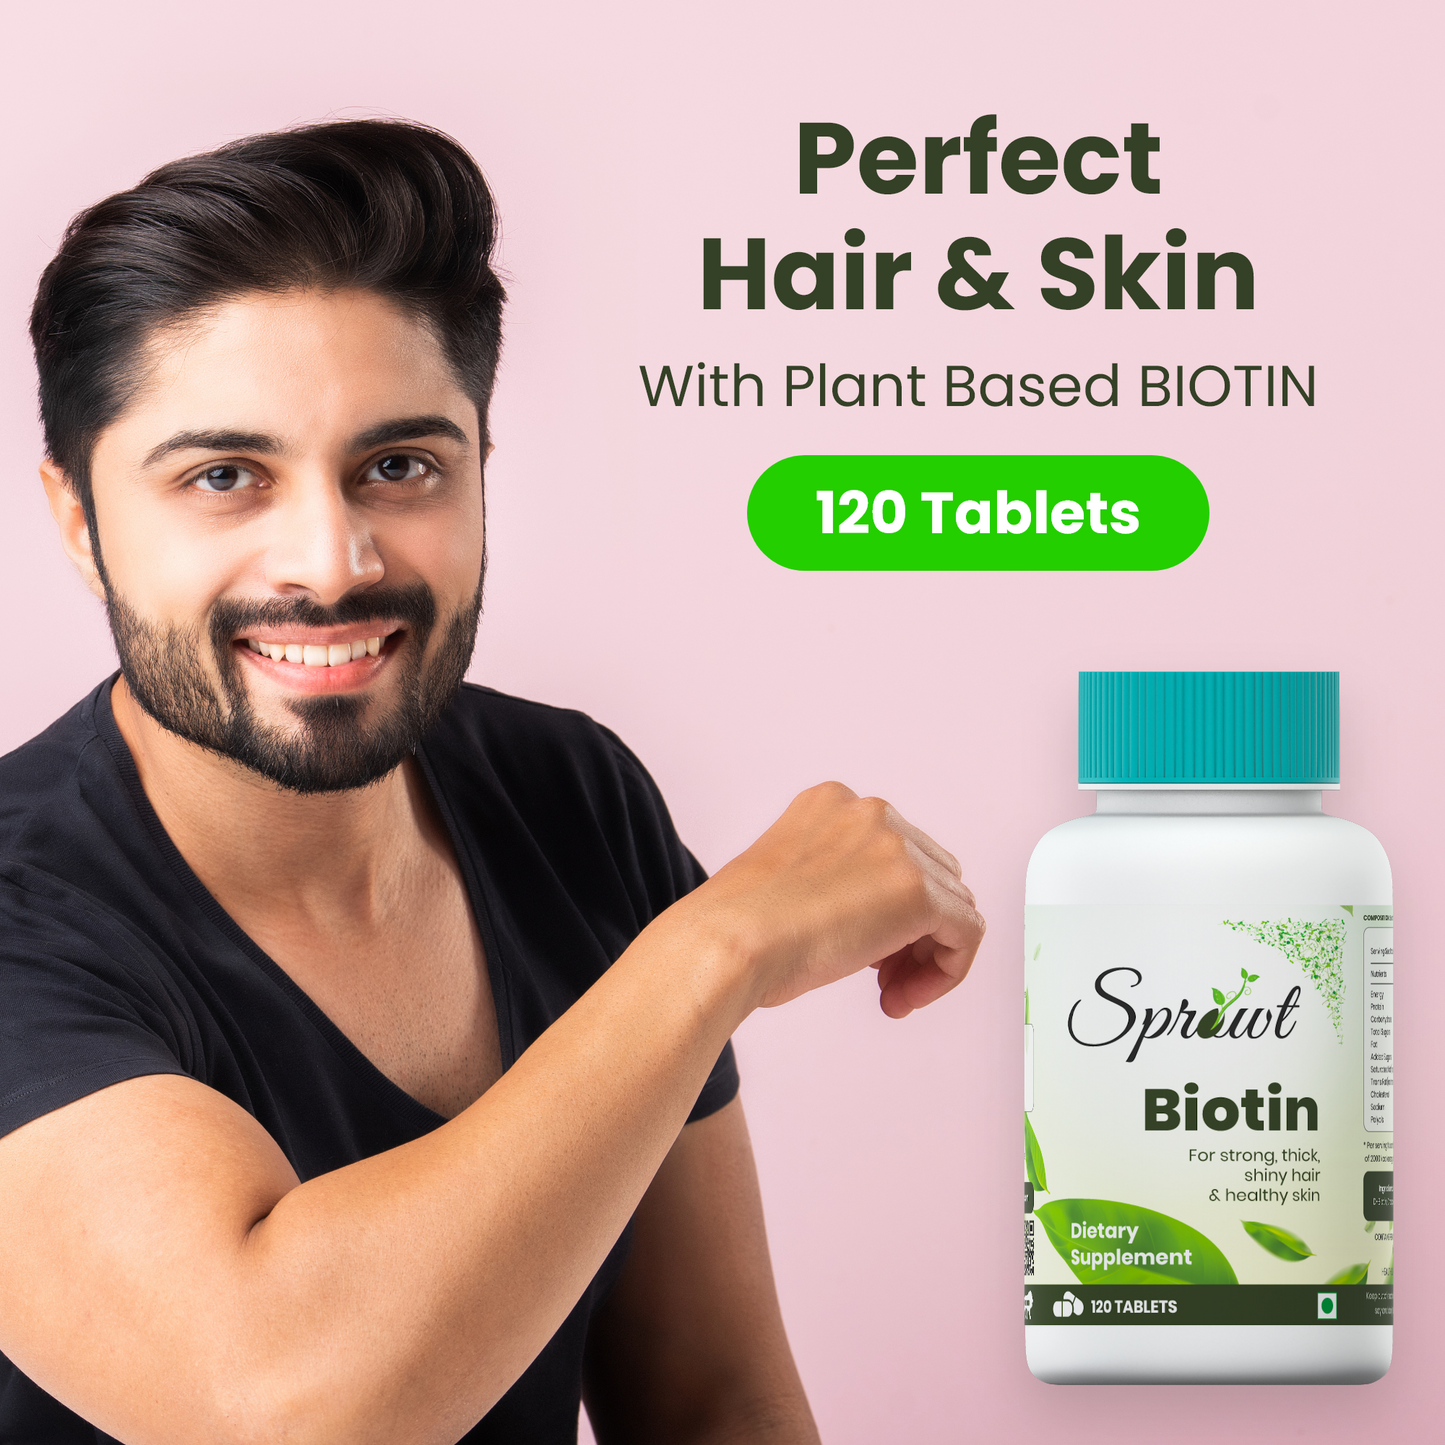 Sprowt Plant Based Biotin for Hair Growth, Skin & Nails - 10000 mcg | Pack of 2, 120 Tablets Each